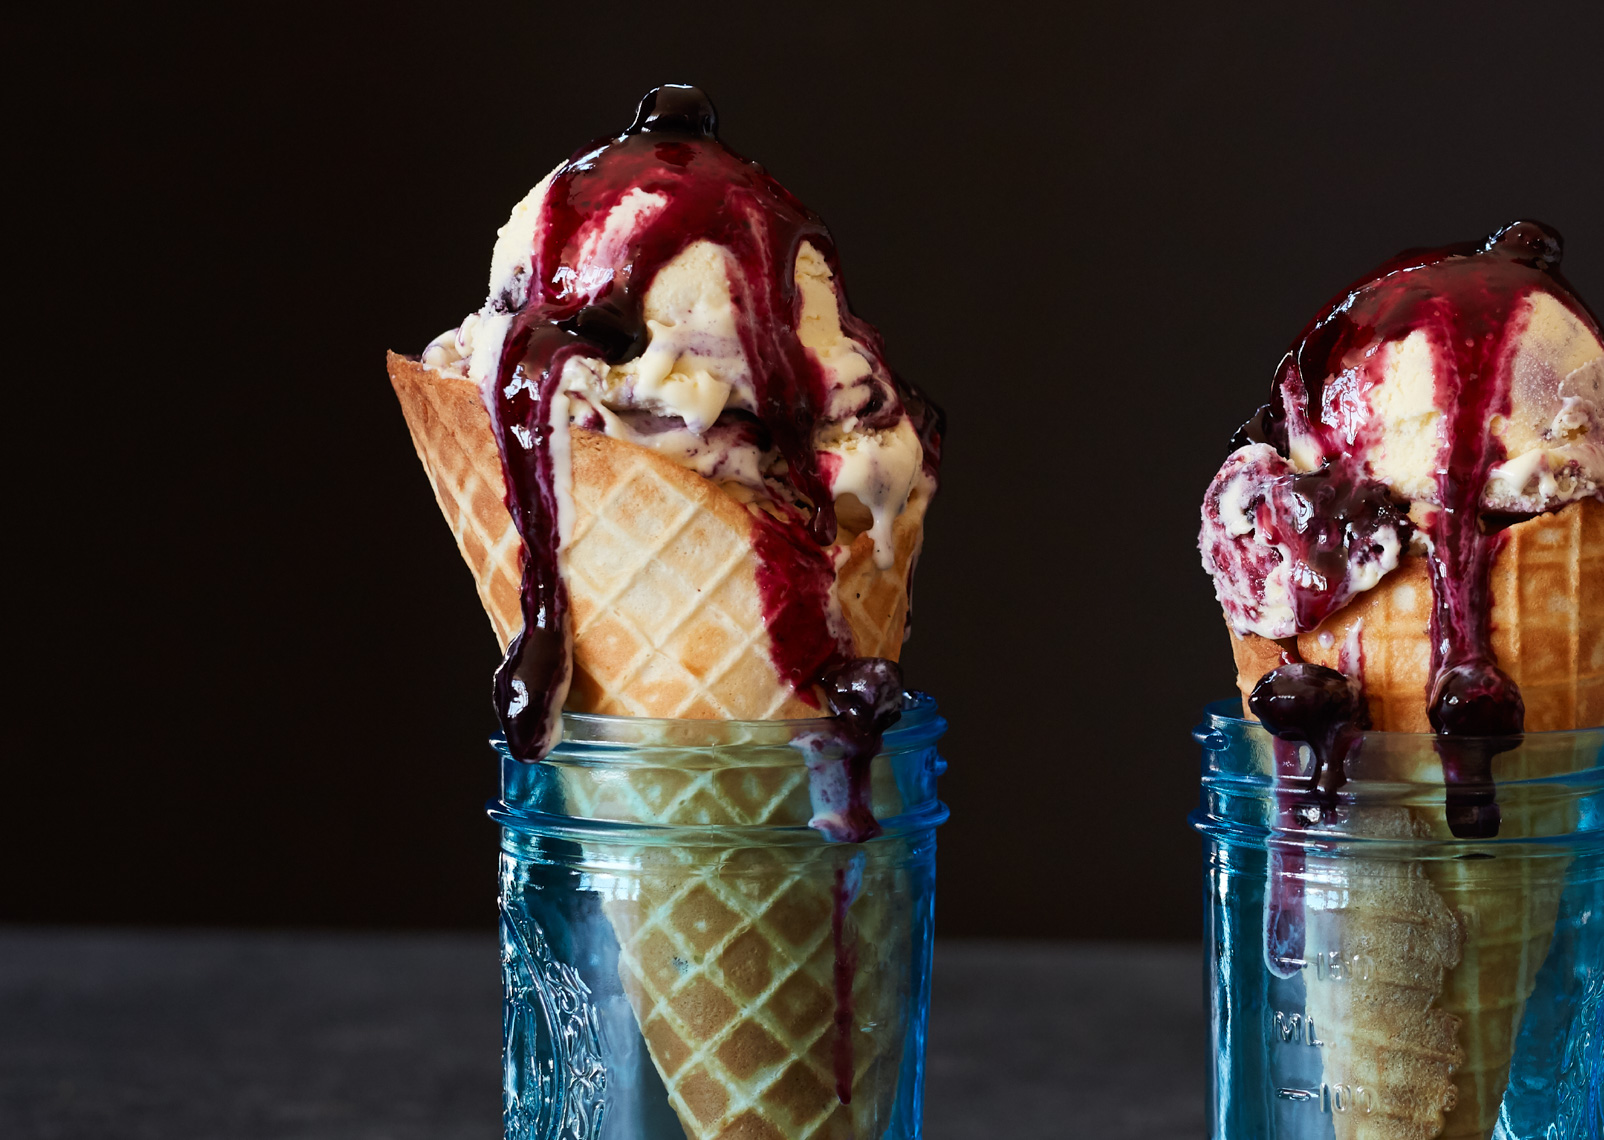 blueberry vanilla ice cream in waffle cones with dripping blueberry compote sauce San Francisco food photographer